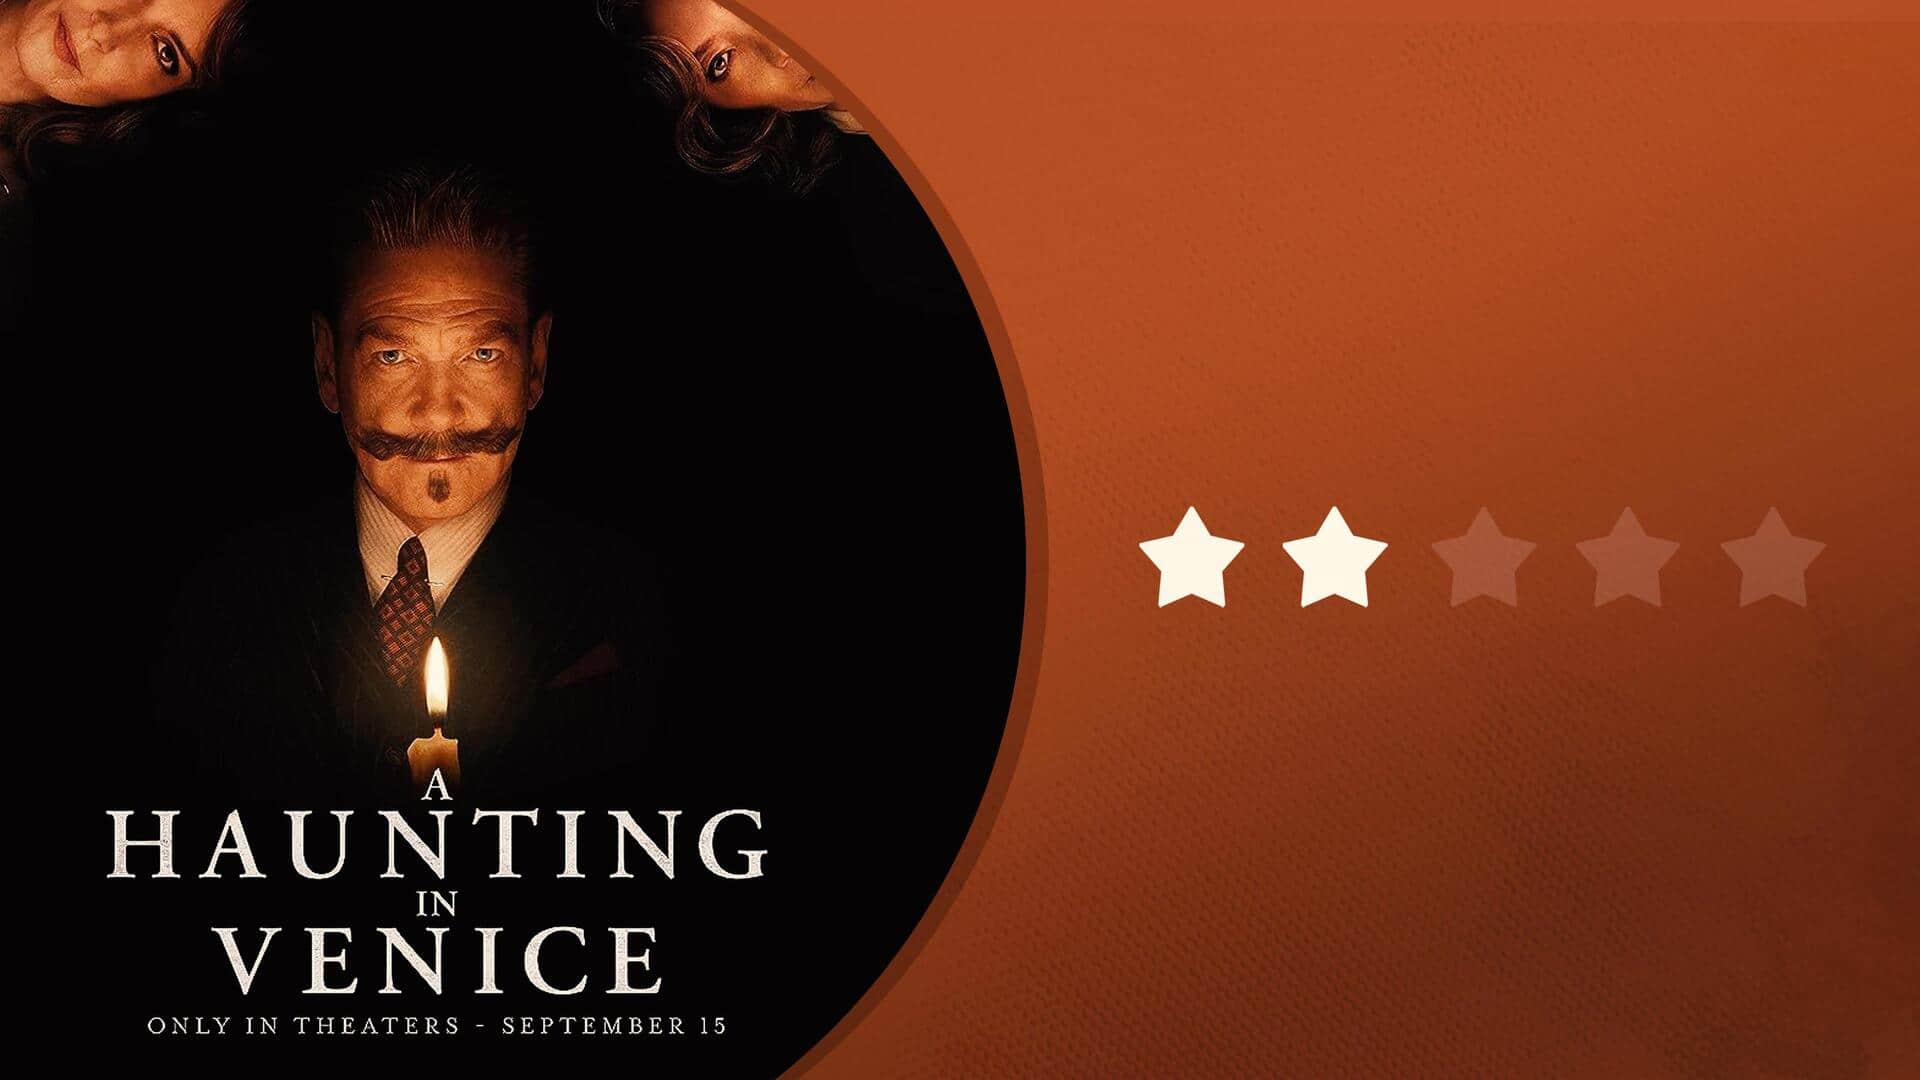 'A Haunting In Venice' review: Kenneth Branagh's whodunnit-thriller is so-so